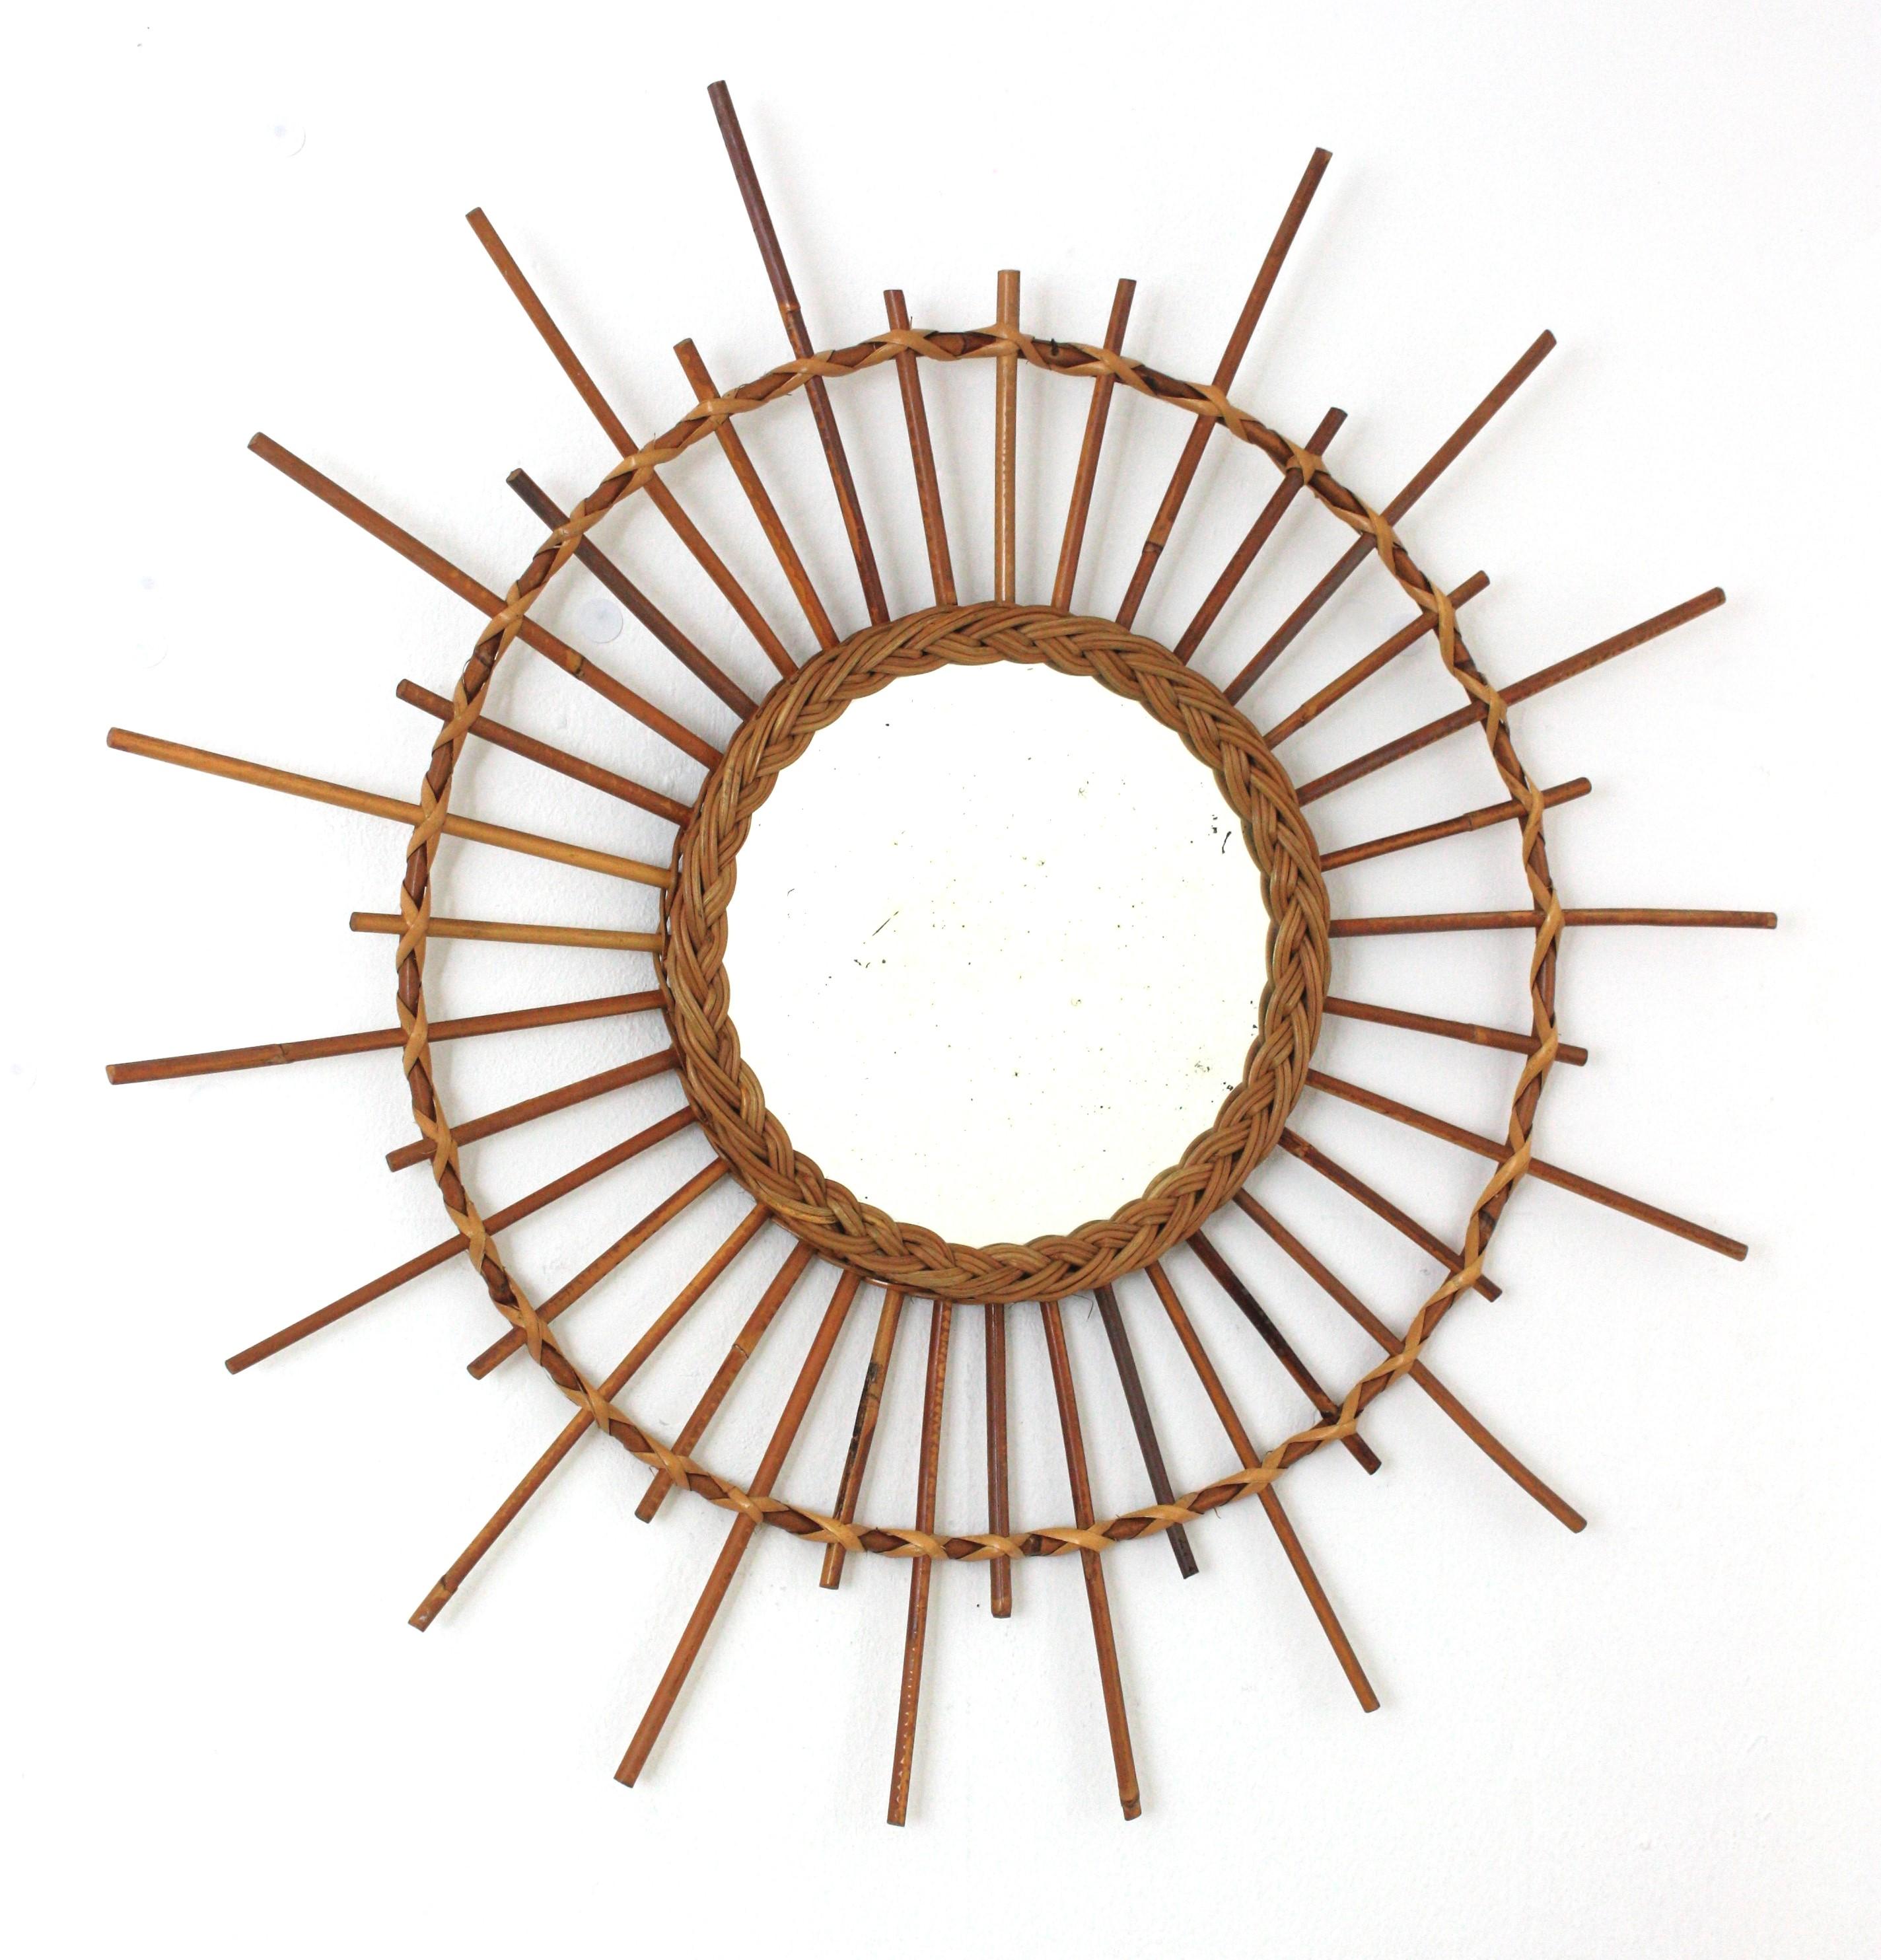 Coastal rattan and wicker sunburst / starburst mirror, France, 1960s.
Hand crafted starburst sunburst mirror with rattan rays and woven wicker ring surrounding the central glass. 
This mirror will add all the freshness of the Mediterranean French